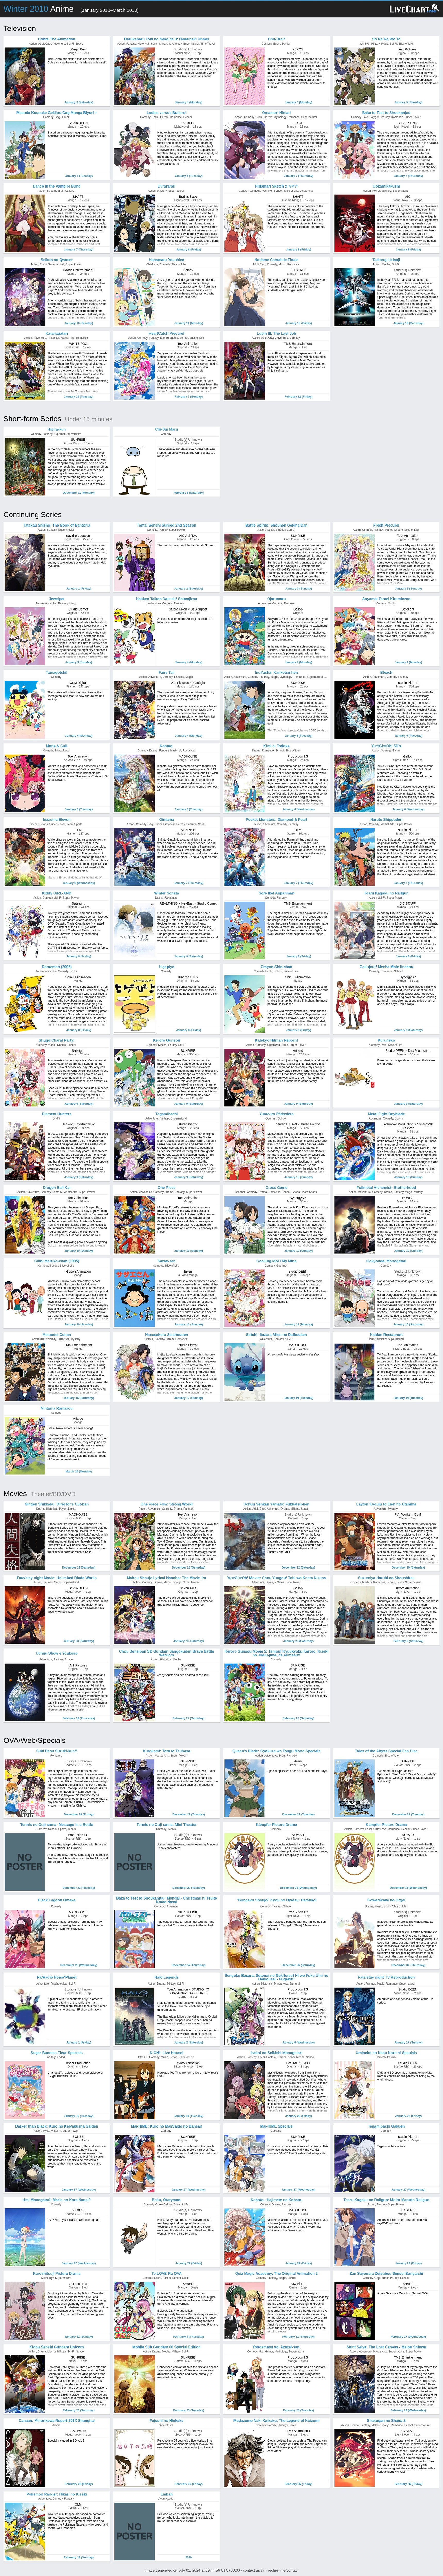 Fall 2010 New Anime List | Visit The Website Now At http://teknogaming.com